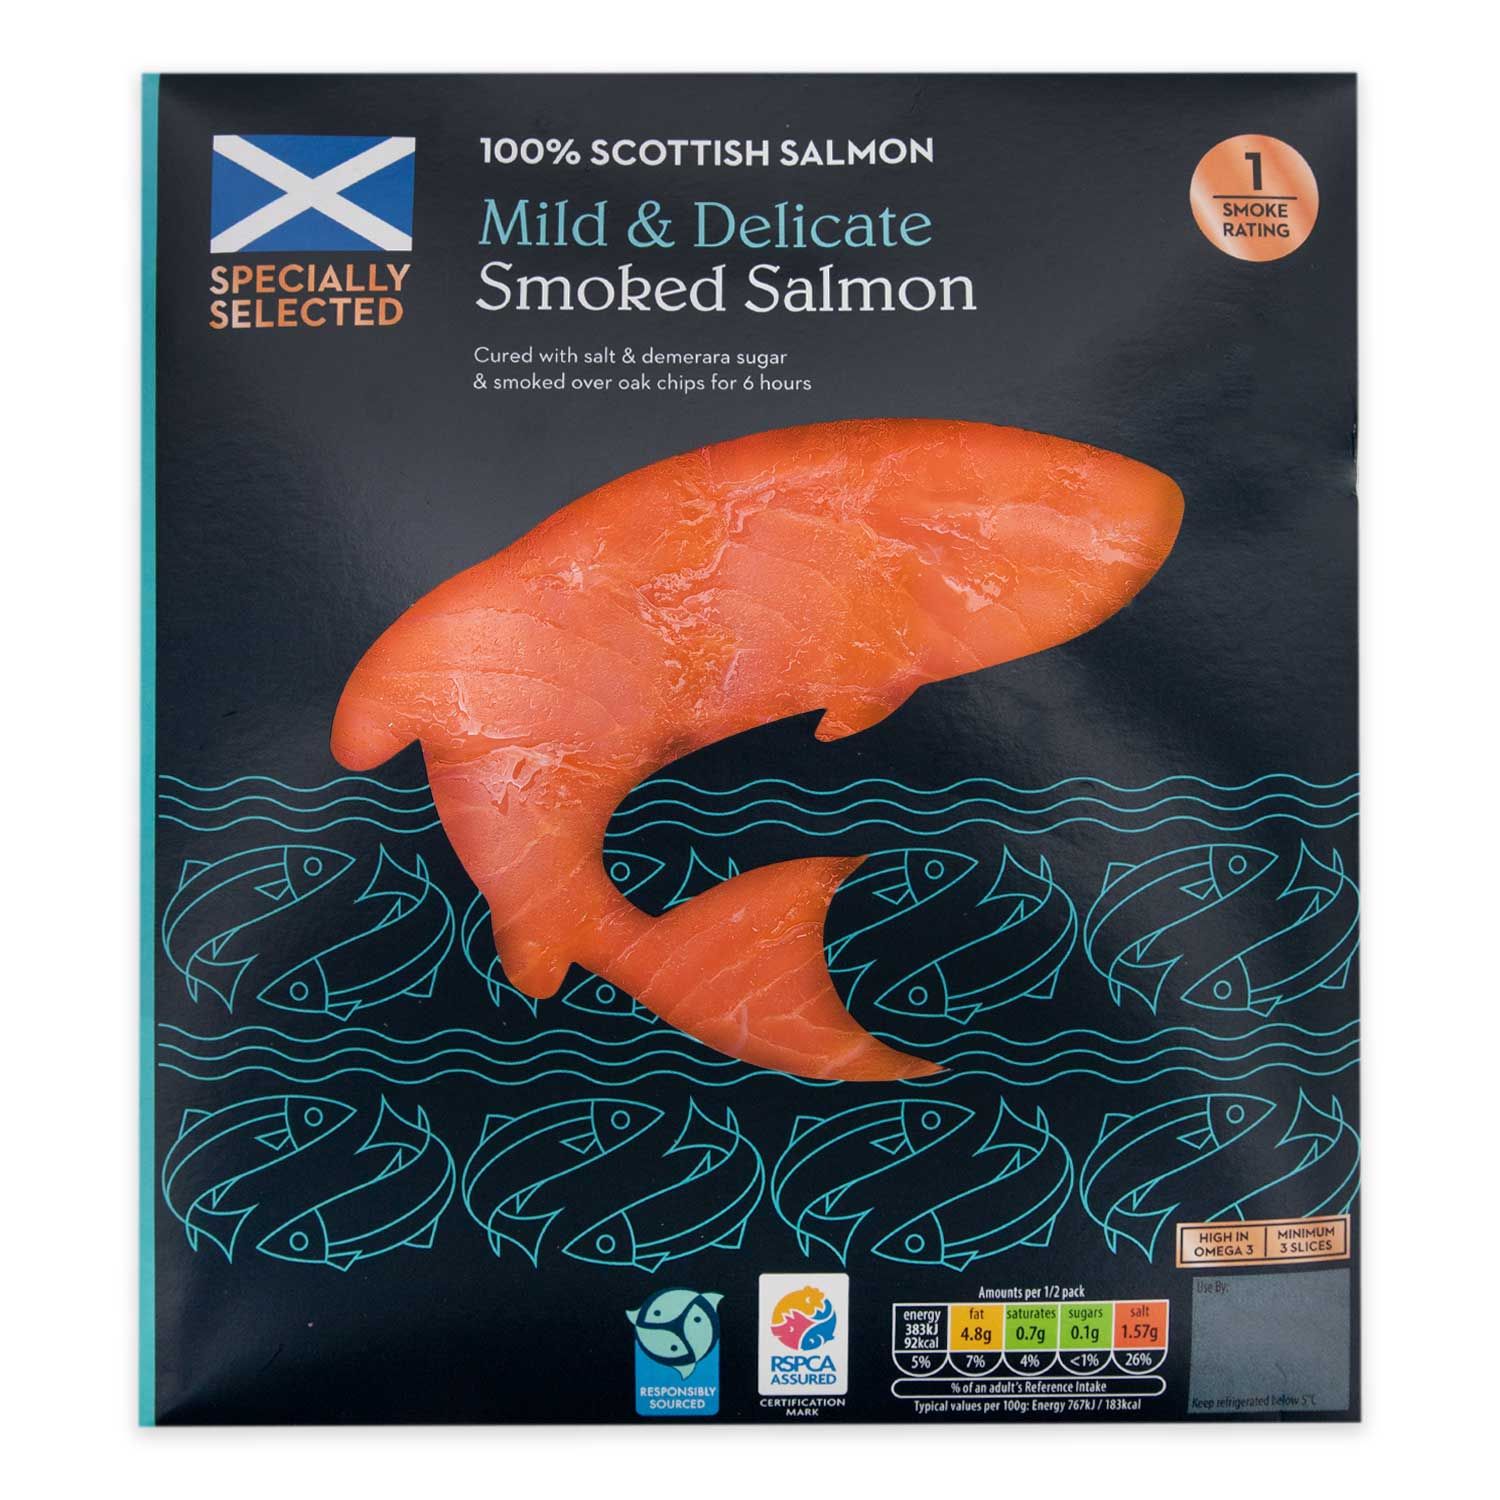 Specially Selected Mild & Delicate Smoked Salmon Slices 100g